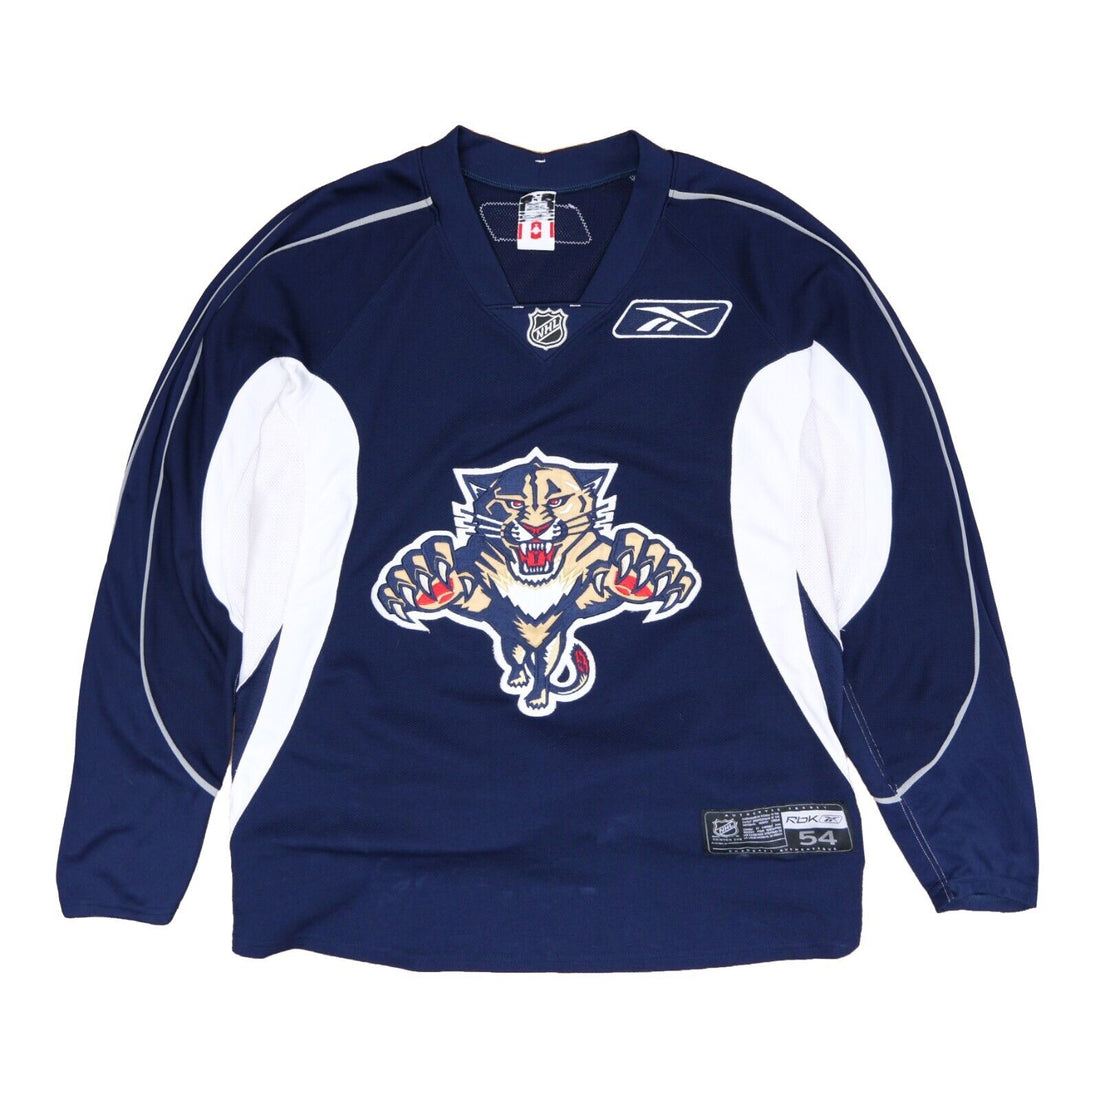 Florida Panthers Adidas Practice Issued Jersey Sz 58